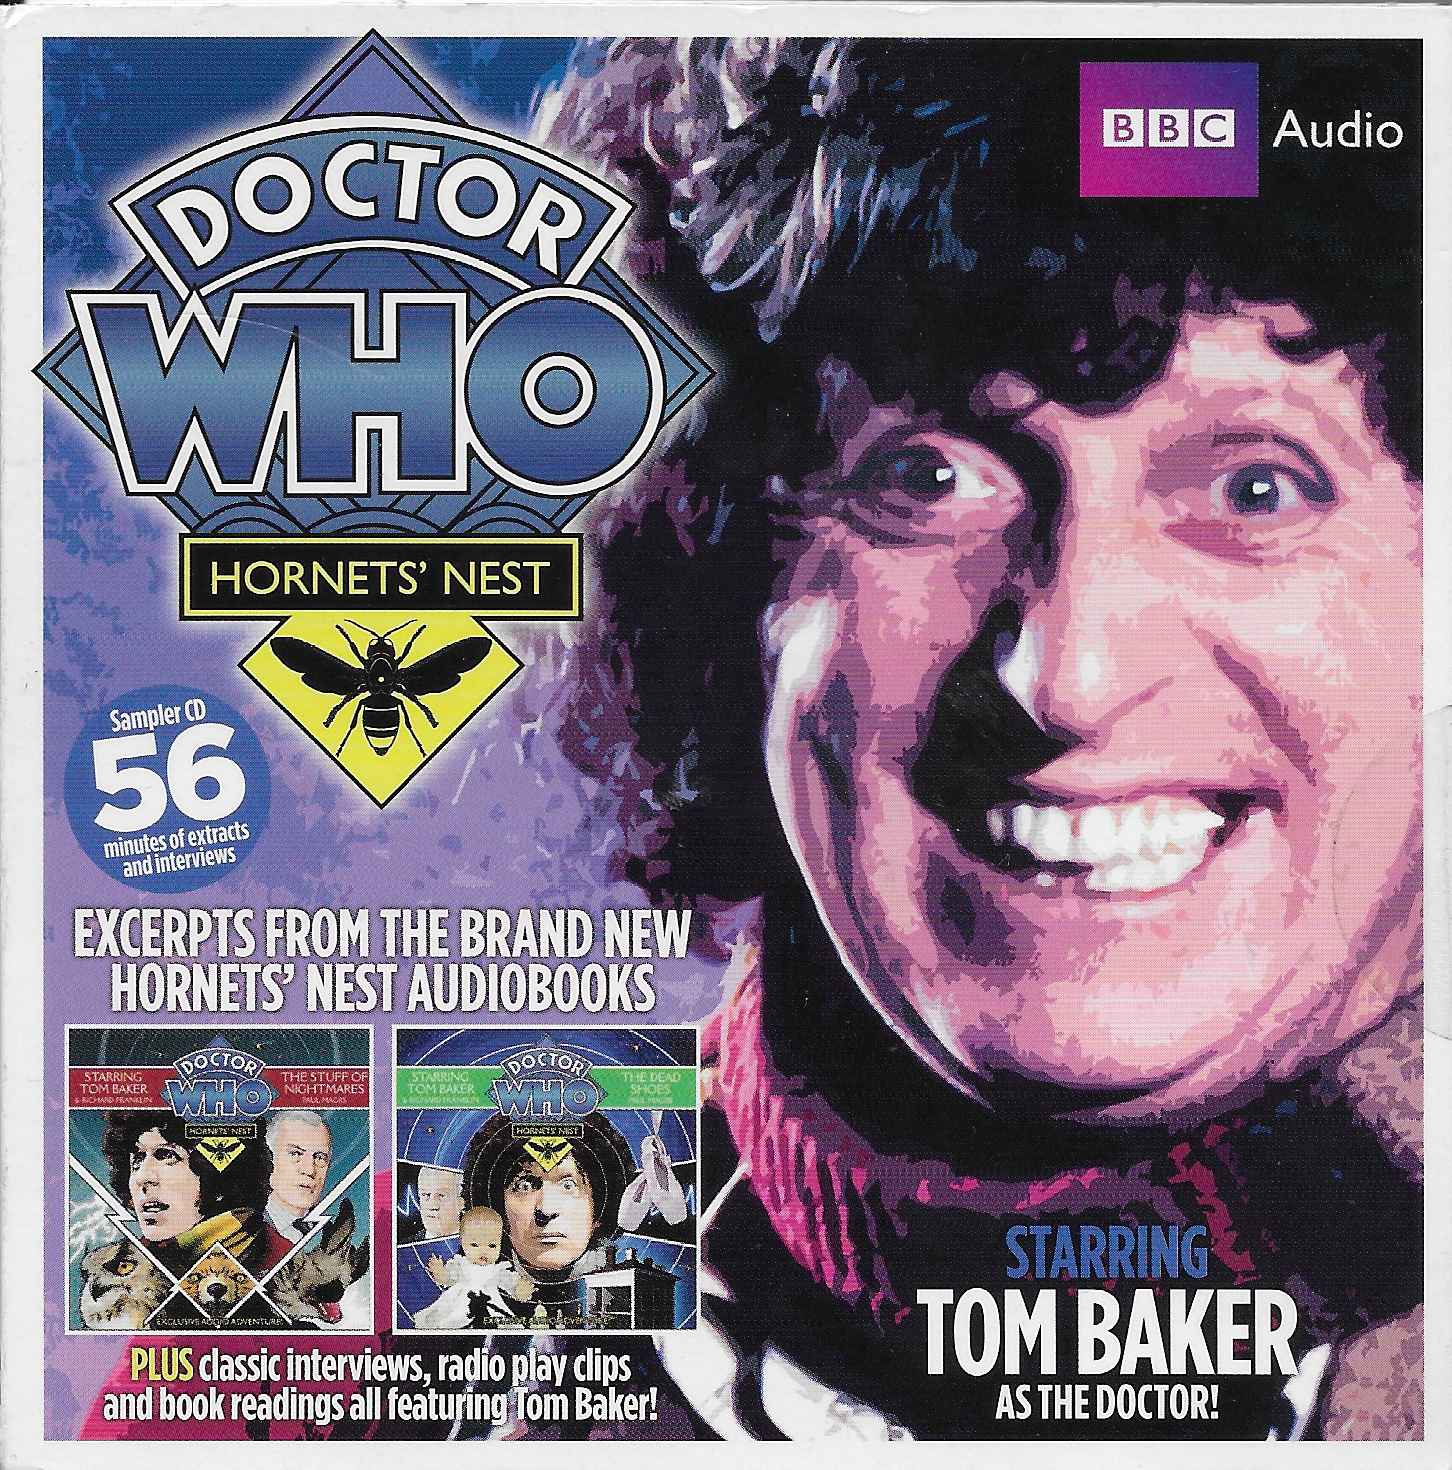 Picture of SFX 188 Doctor Who - Tom Baker by artist Various from the BBC records and Tapes library